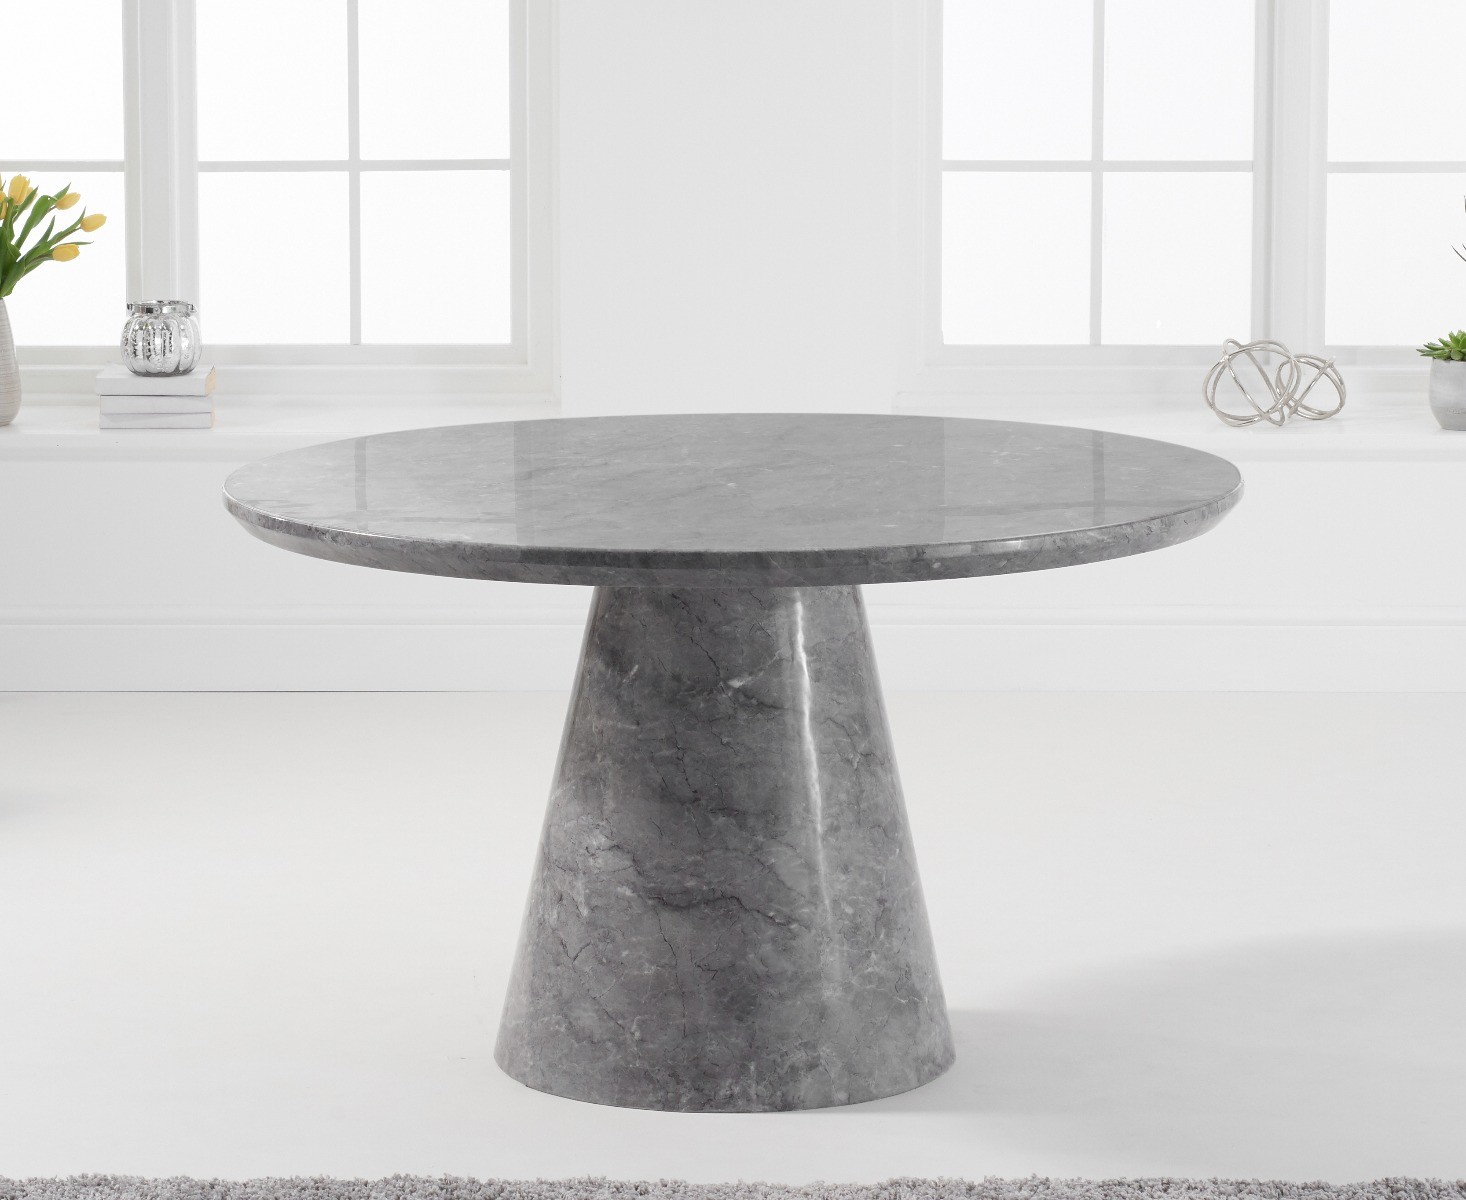 Photo 3 of Ravello 130cm round grey marble dining table with 6 cream francesca chairs